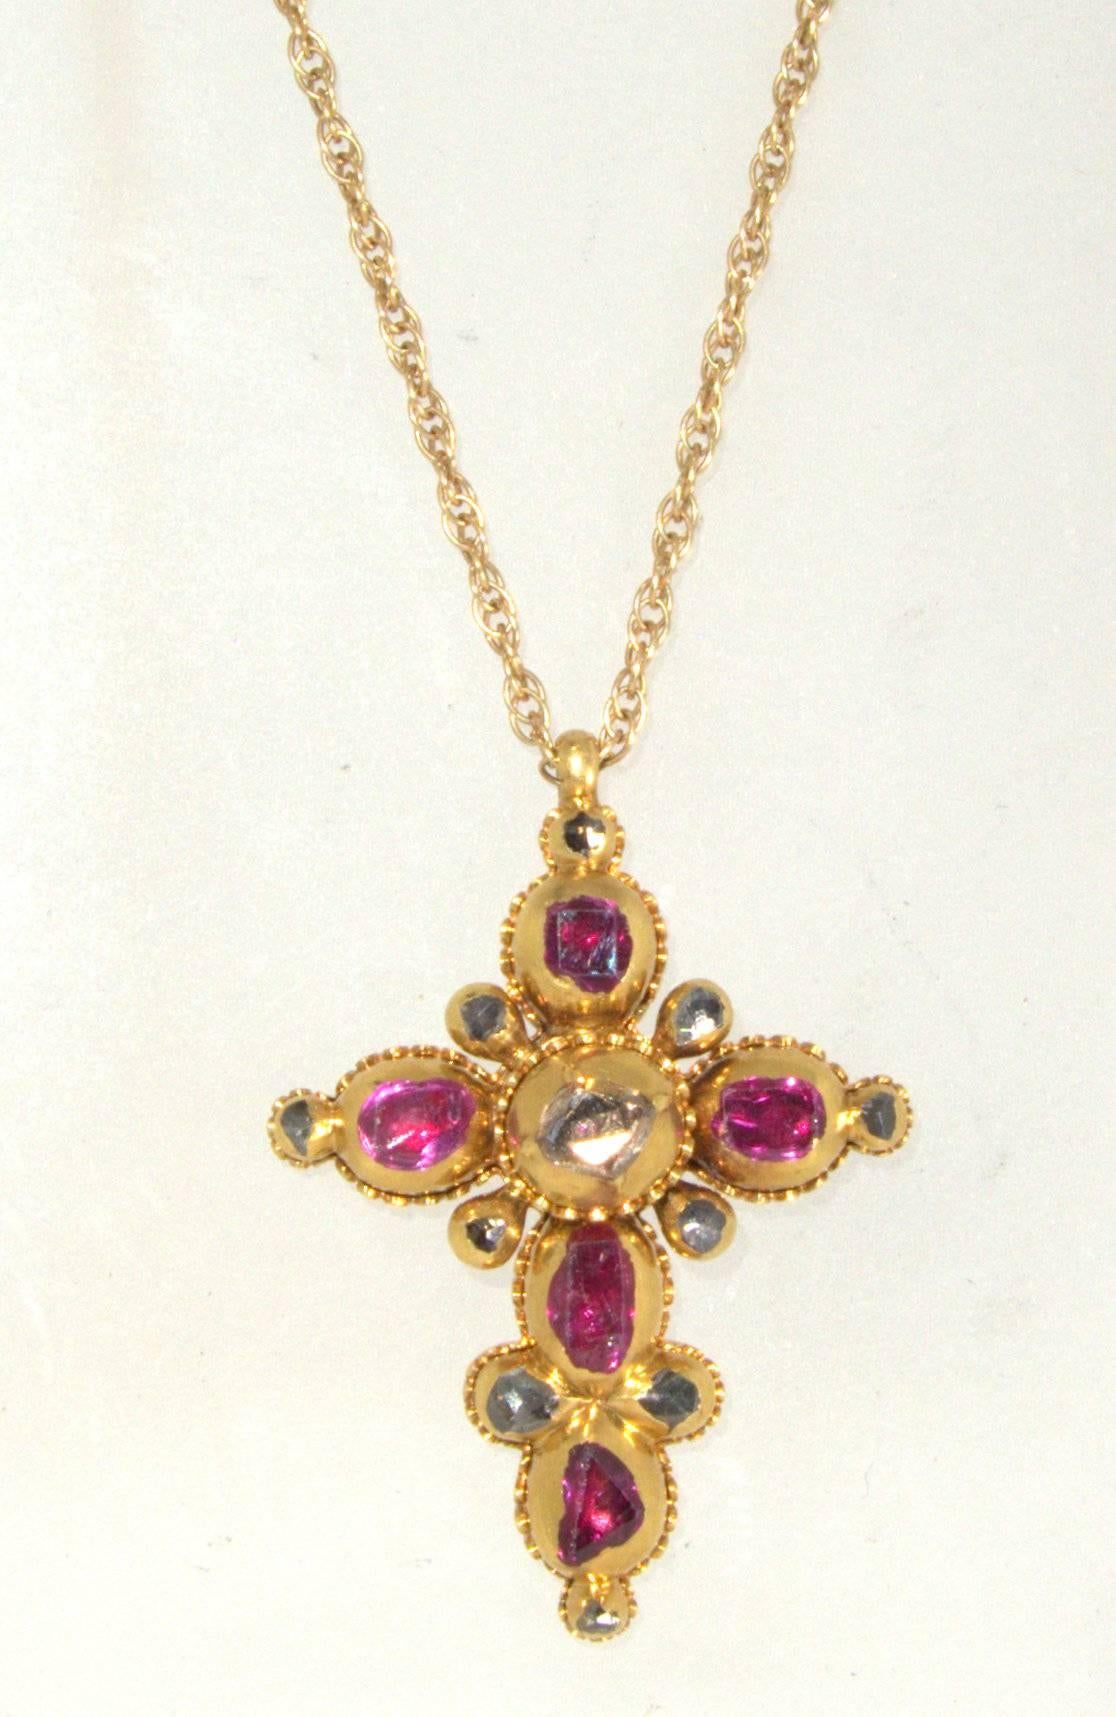 Very early table and rose cut diamonds and rubies are set in closed back 18K gold.  This cross is in fine condition especially when one considers its age.  The cross is 1 1/3 inches long and is suspended on a newer 14K chain.  Finished with  a